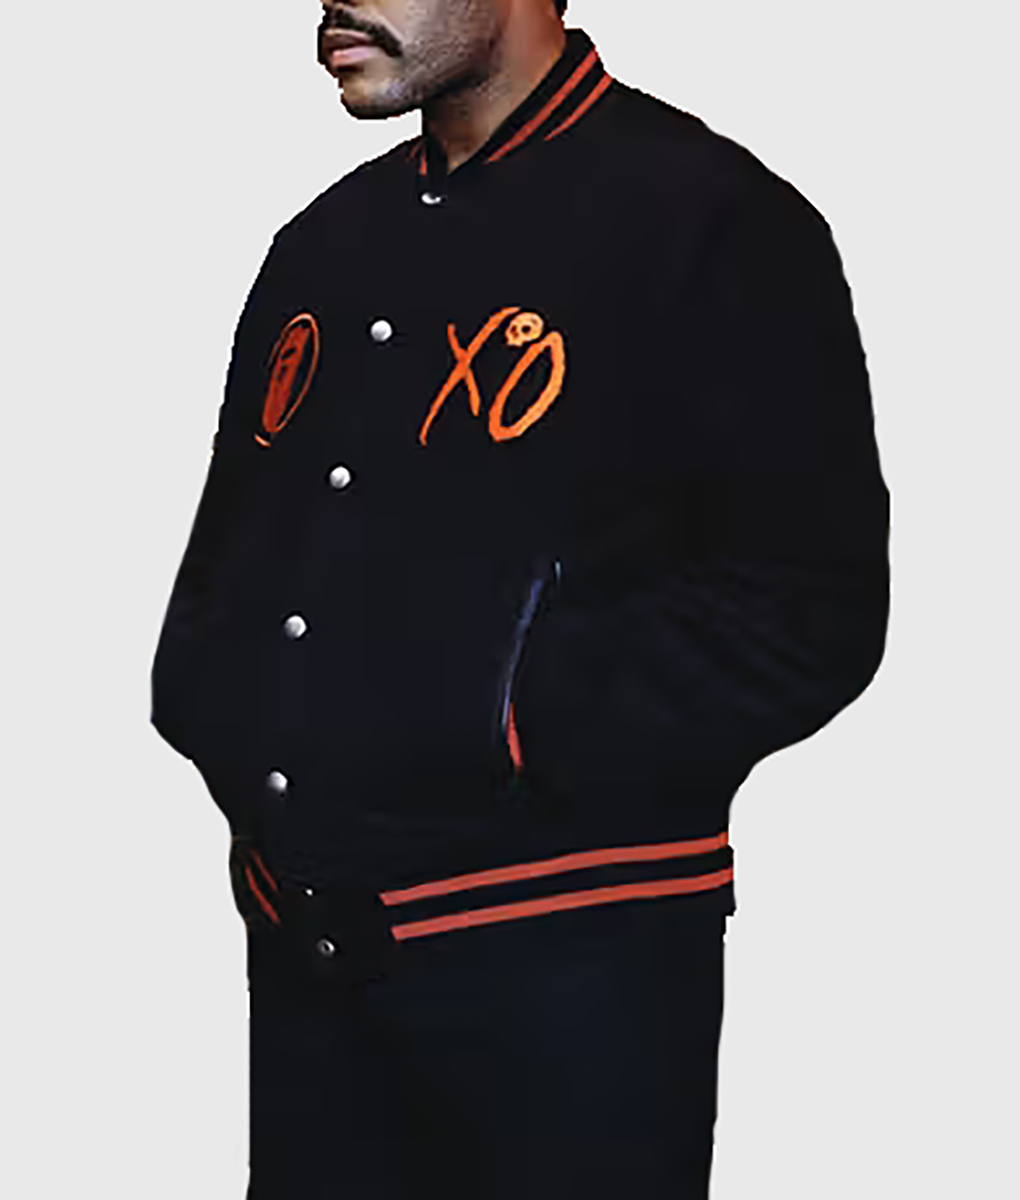 THE WEEKND Red XO Jacket-1